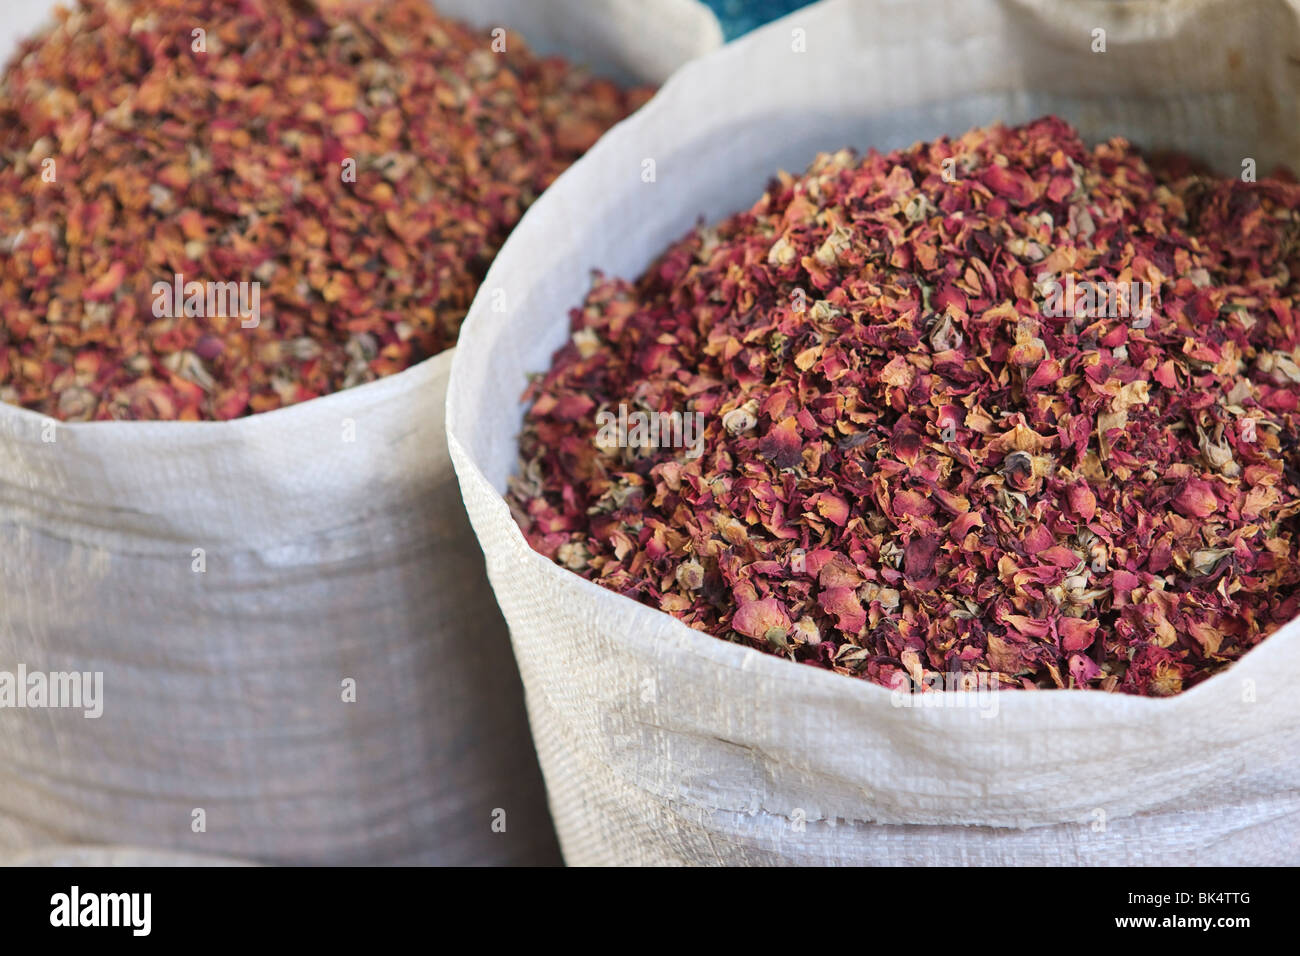 Dried rose petals for sale in the Spice Souk, Deira, Dubai, United Arab Emirates, Middle East Stock Photo